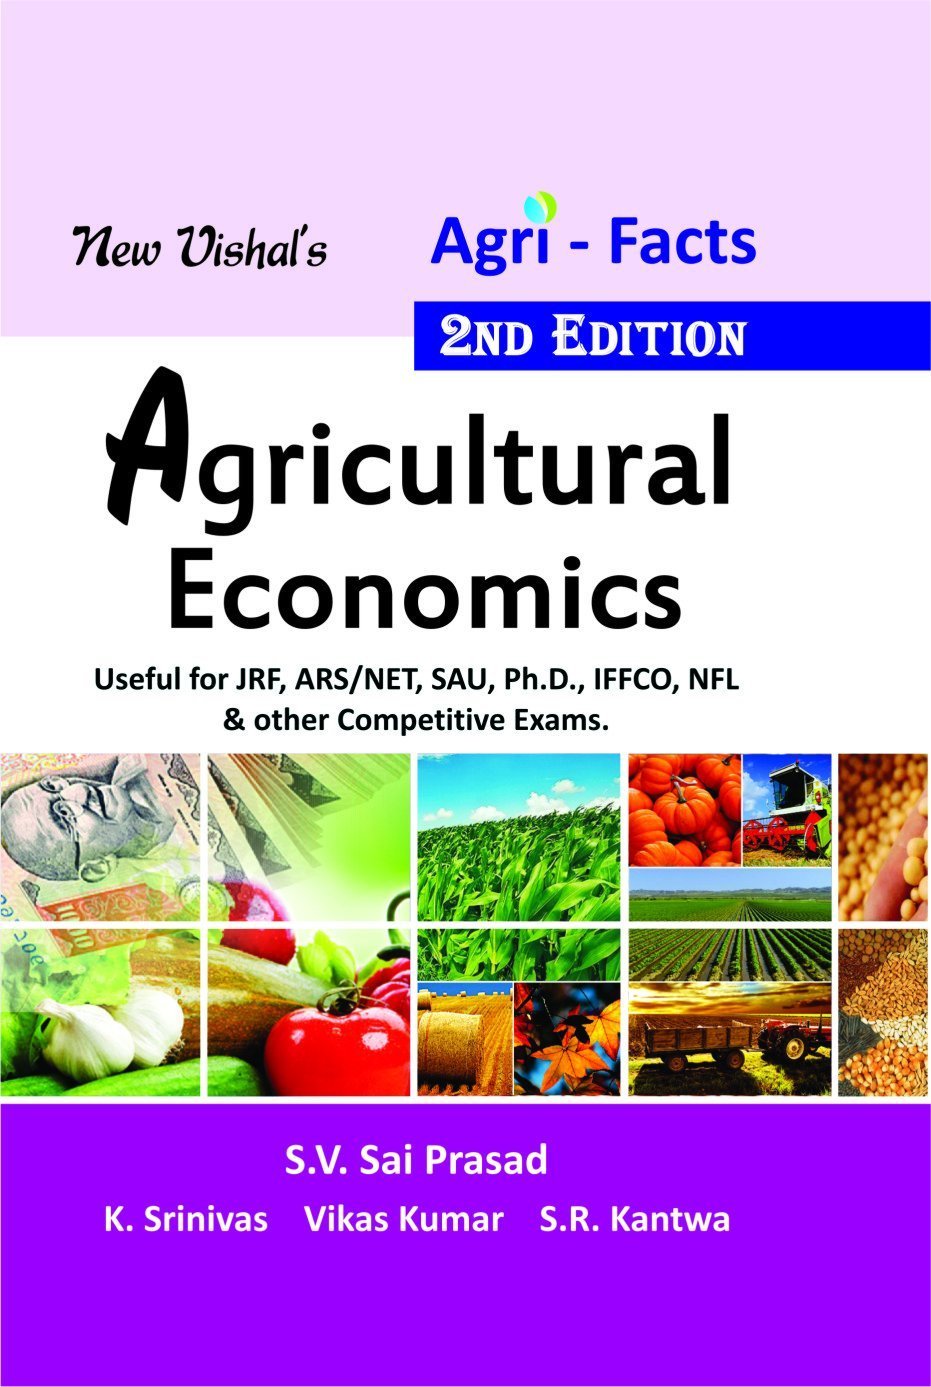 Agri Facts: Agricultural Economics Useful for JRF ARS/NET SAU Ph.D. IFFCO NFL and Other Competitive Exams 2nd edn (PB)